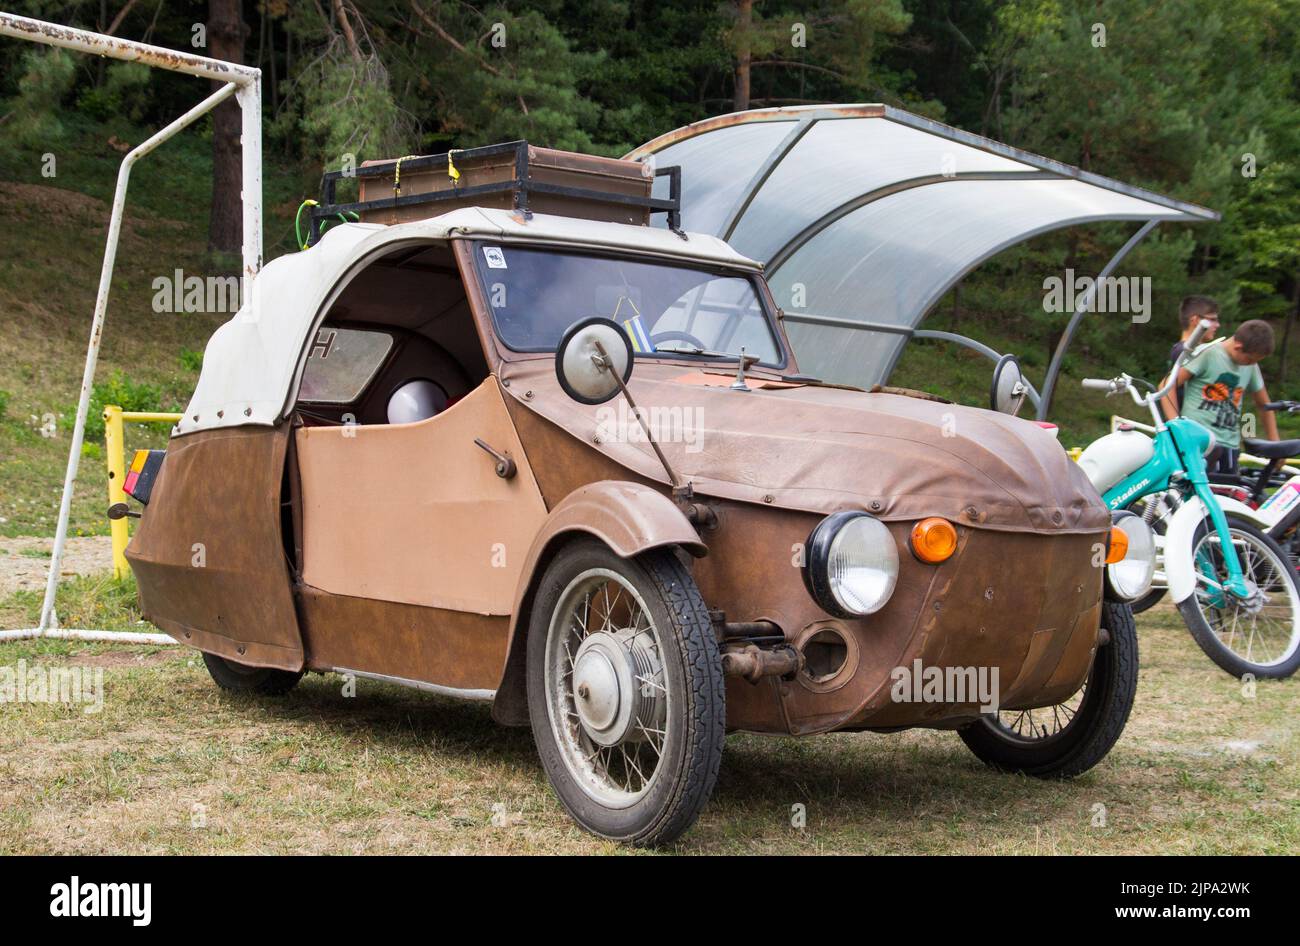 Classic Brown Original Three Wheeled Velorex Leather Cloth Car with a Roof Rack at Oldtimer classic car meeting Stock Photo